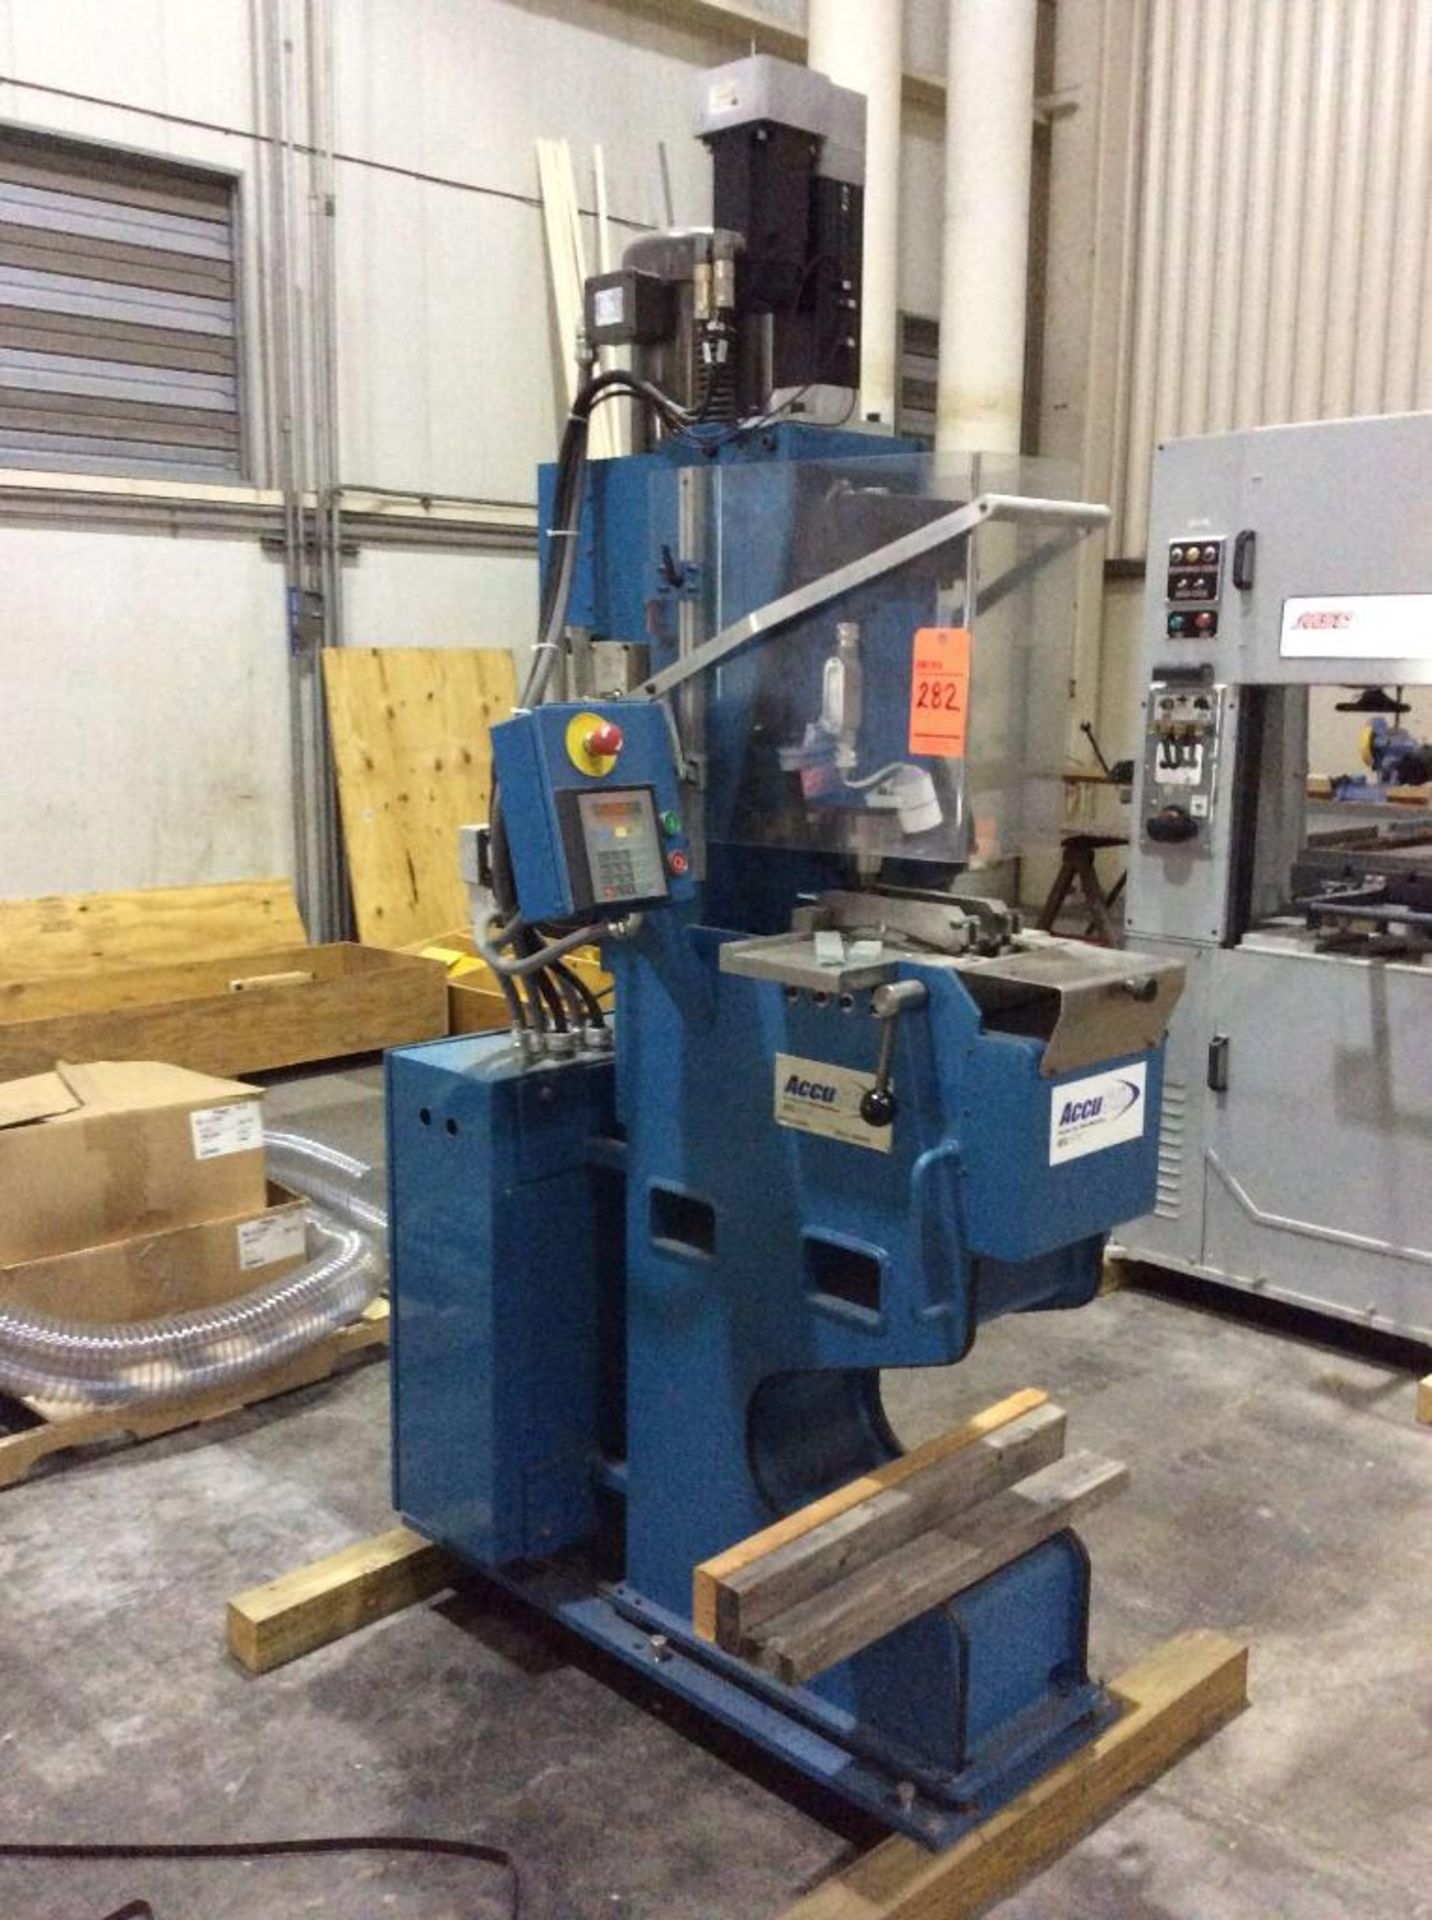 GTC accu-stir friction welder, mn 1028-001, sn 3 with DRO, 5 hp motor, 3 phase